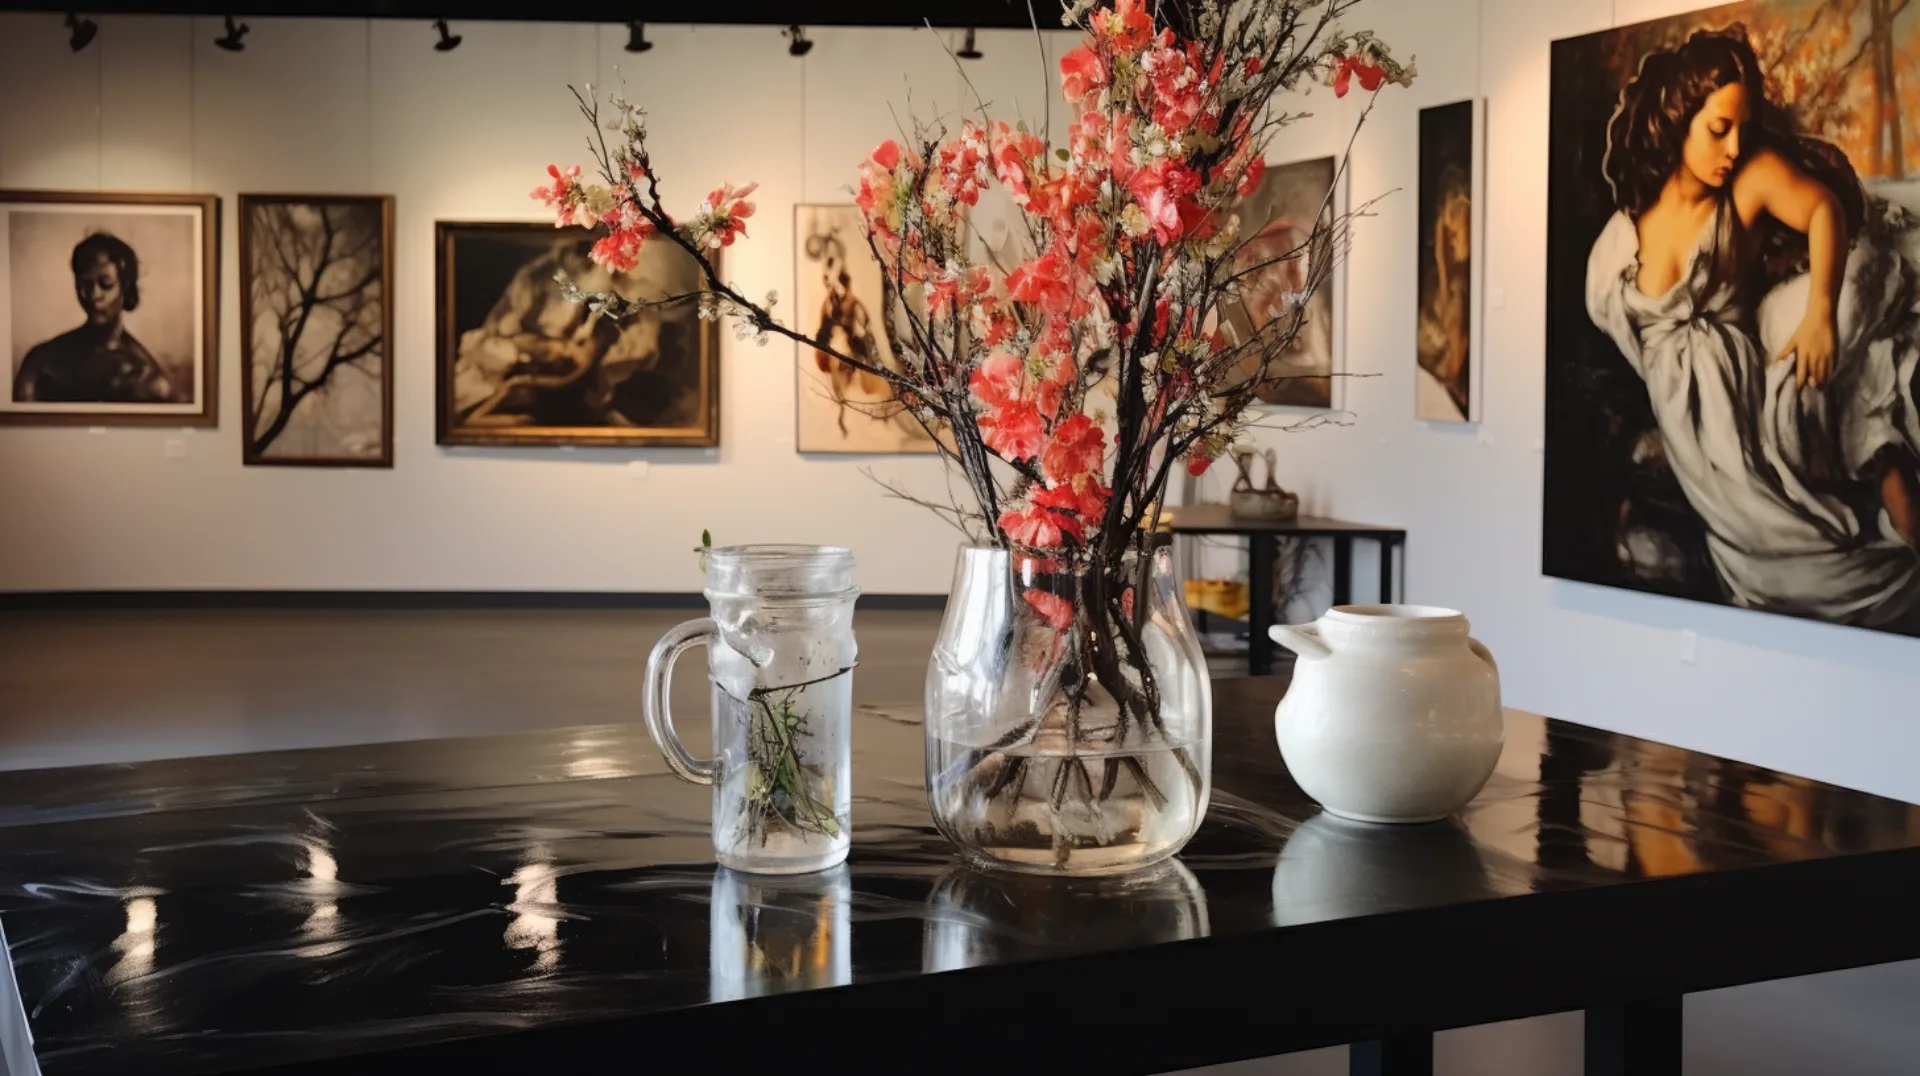 Custot Gallery Fine Art Artistic Display: This image provides a sneak peek into the refined and eclectic fine art offerings, highlighting the gallery's commitment to artistic excellence